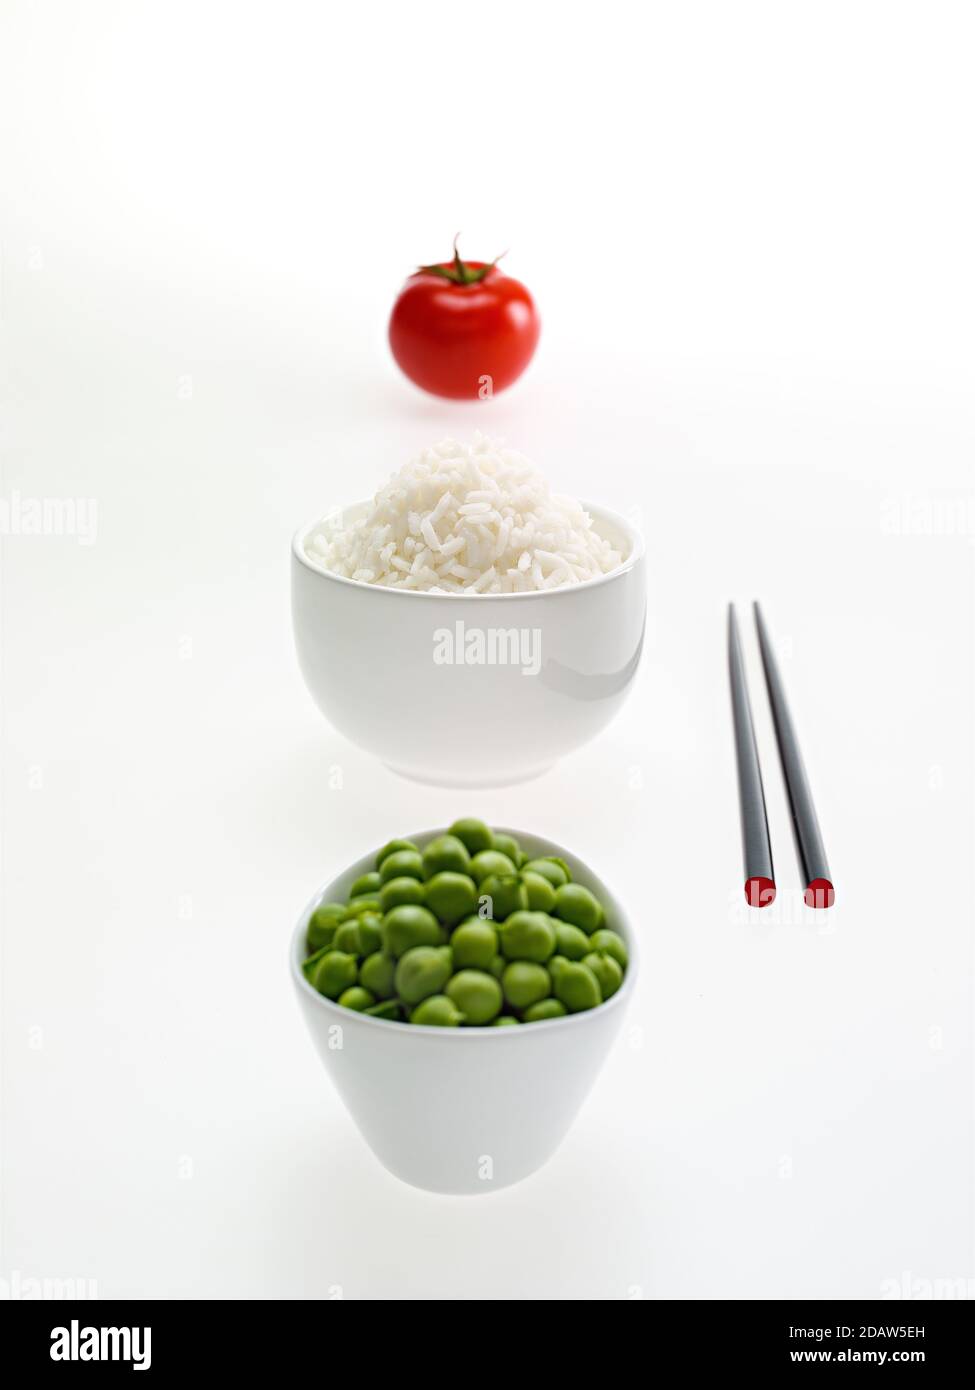 Tomato, rice and peas, with white bowls, and Chinese chopsticks, over white background. Stock Photo